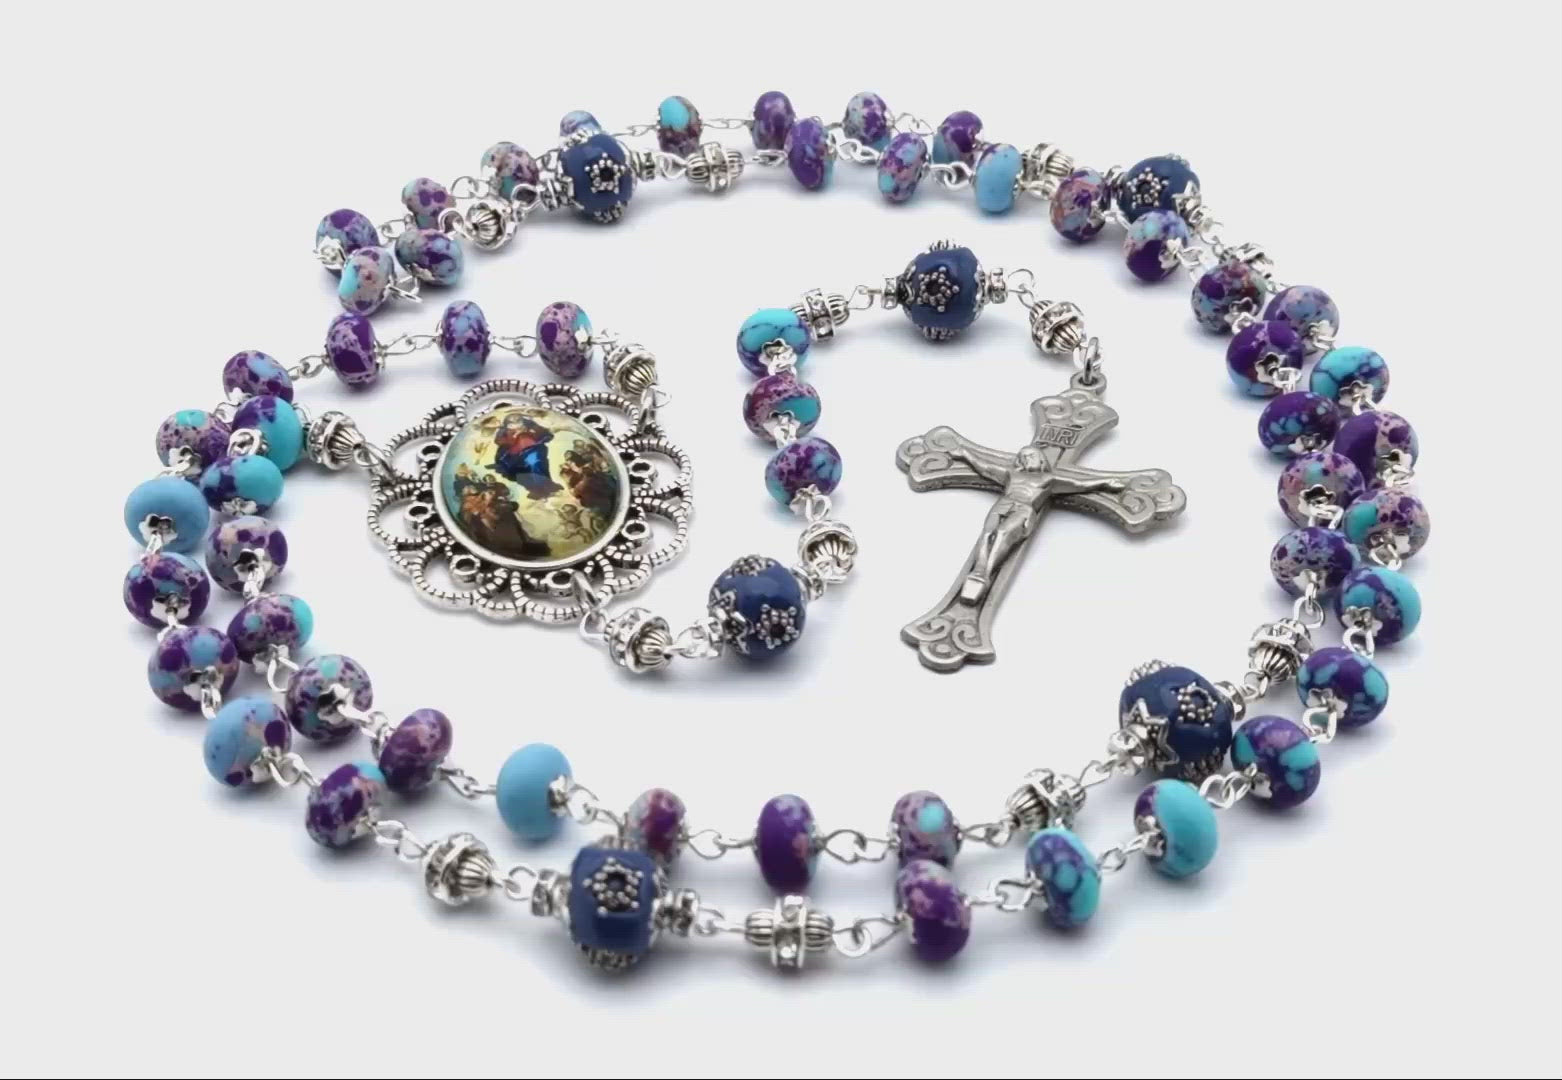 The Assumption of Mary unique rosary beads with imperial jasper gemstone beads, silver crucifix and large picture centre medal.